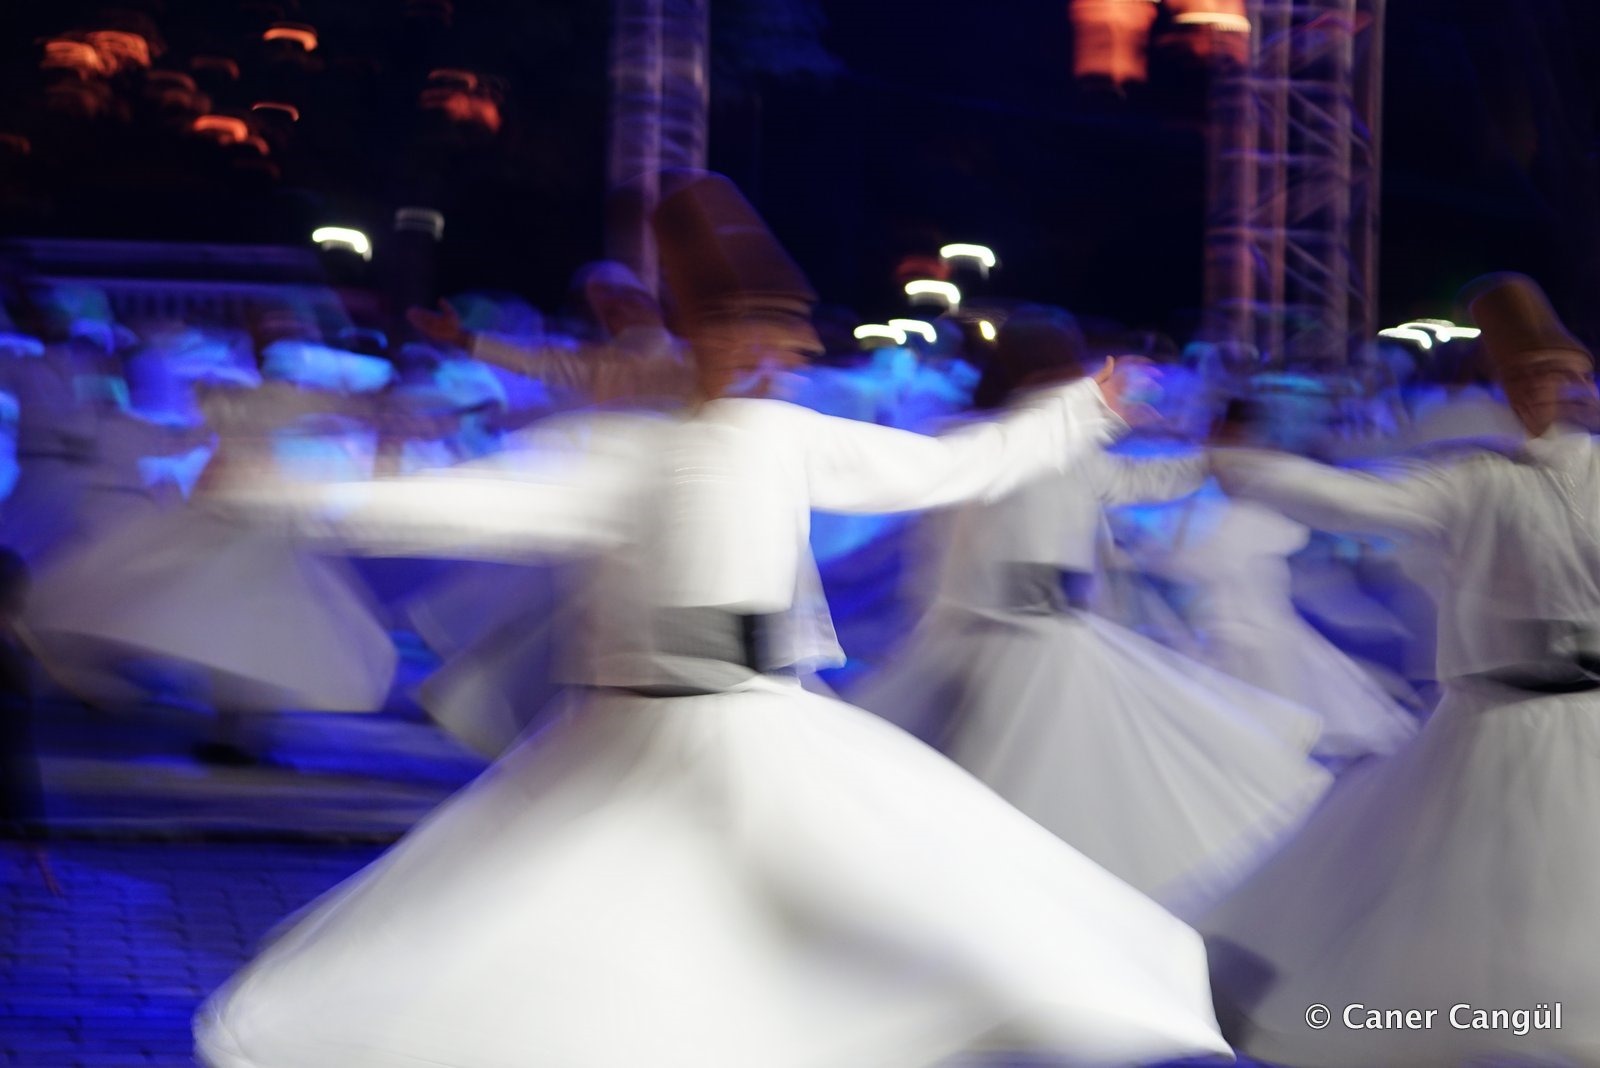 750 Whirling Dervishes Perform The Sema in Front of The Hagia Sophia